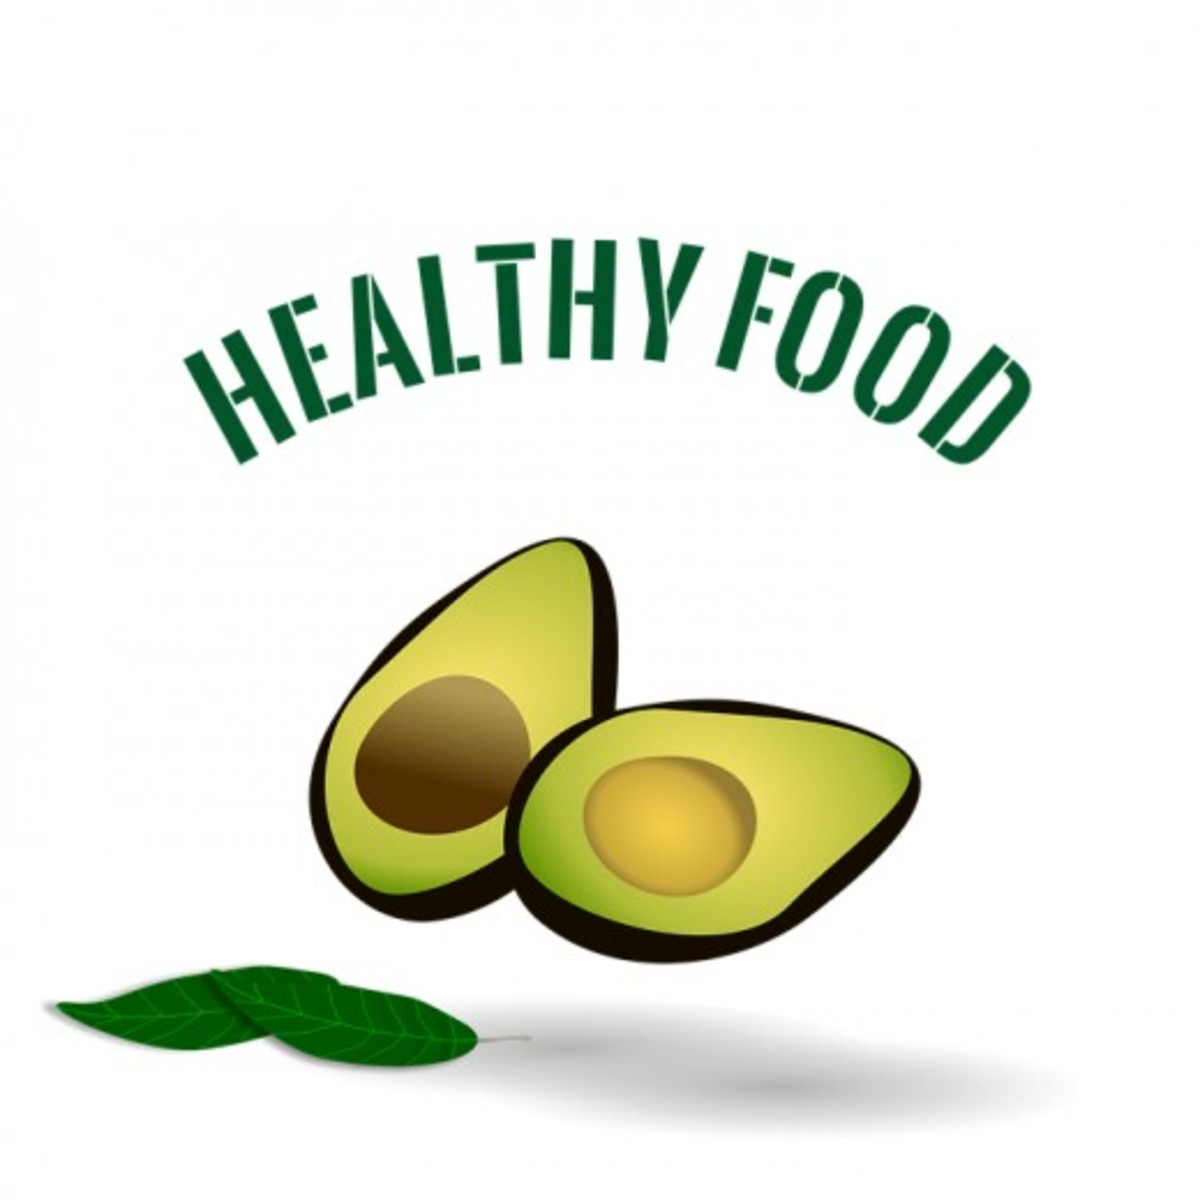 avocados-one-of-the-most-healthy-foods-in-the-world